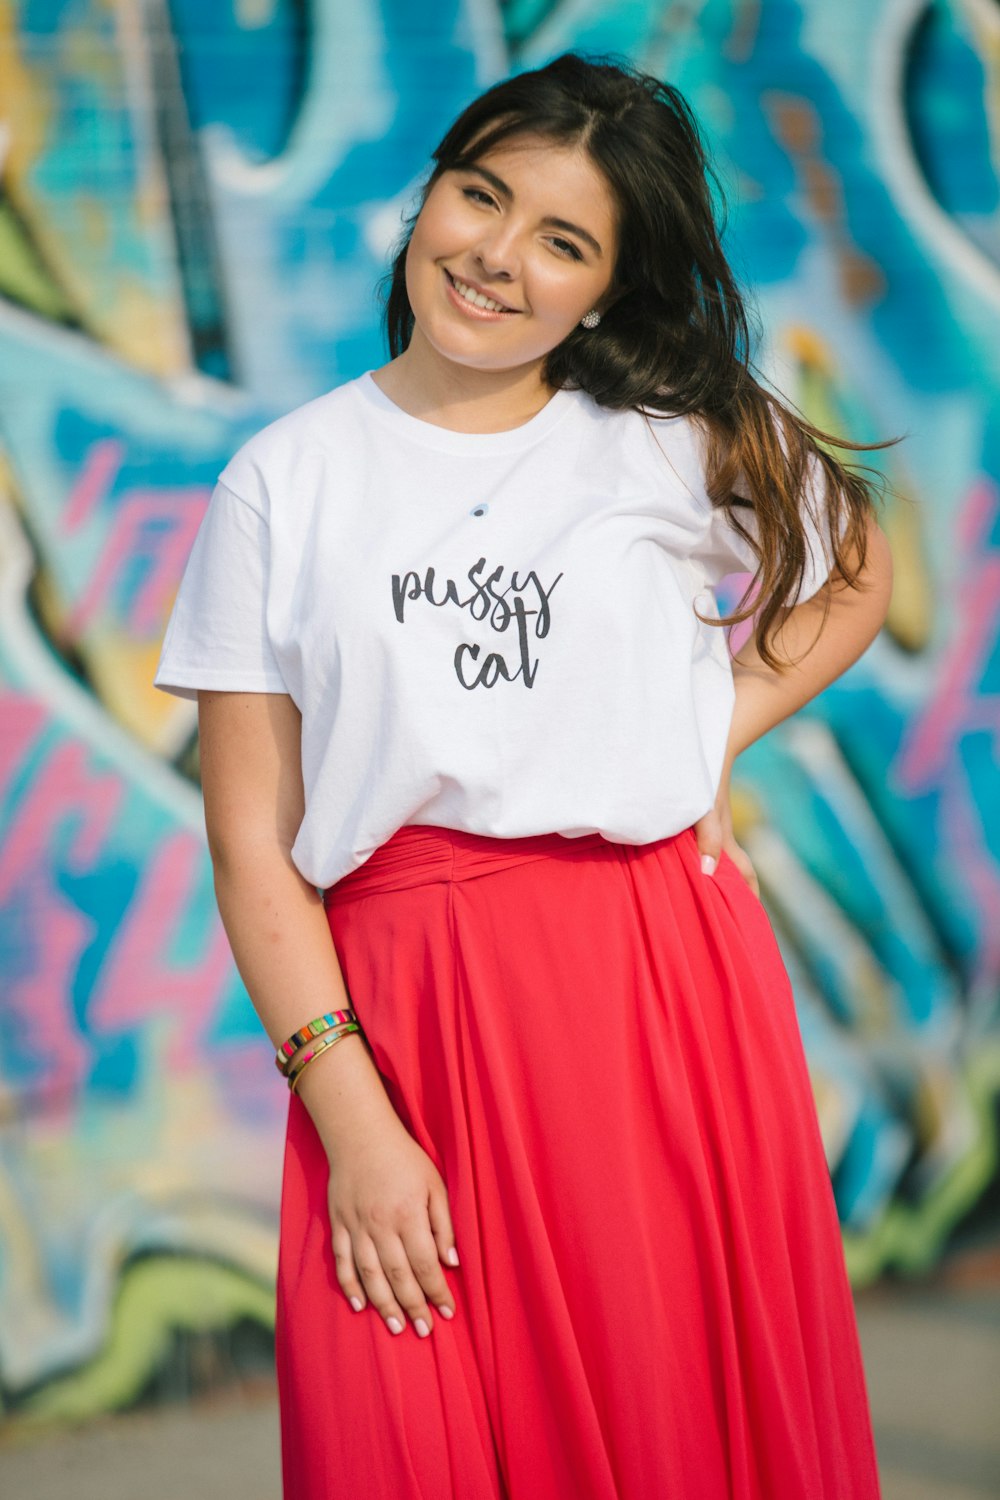 Woman in white crew neck t-shirt and red skirt photo – Free Italianità  Image on Unsplash